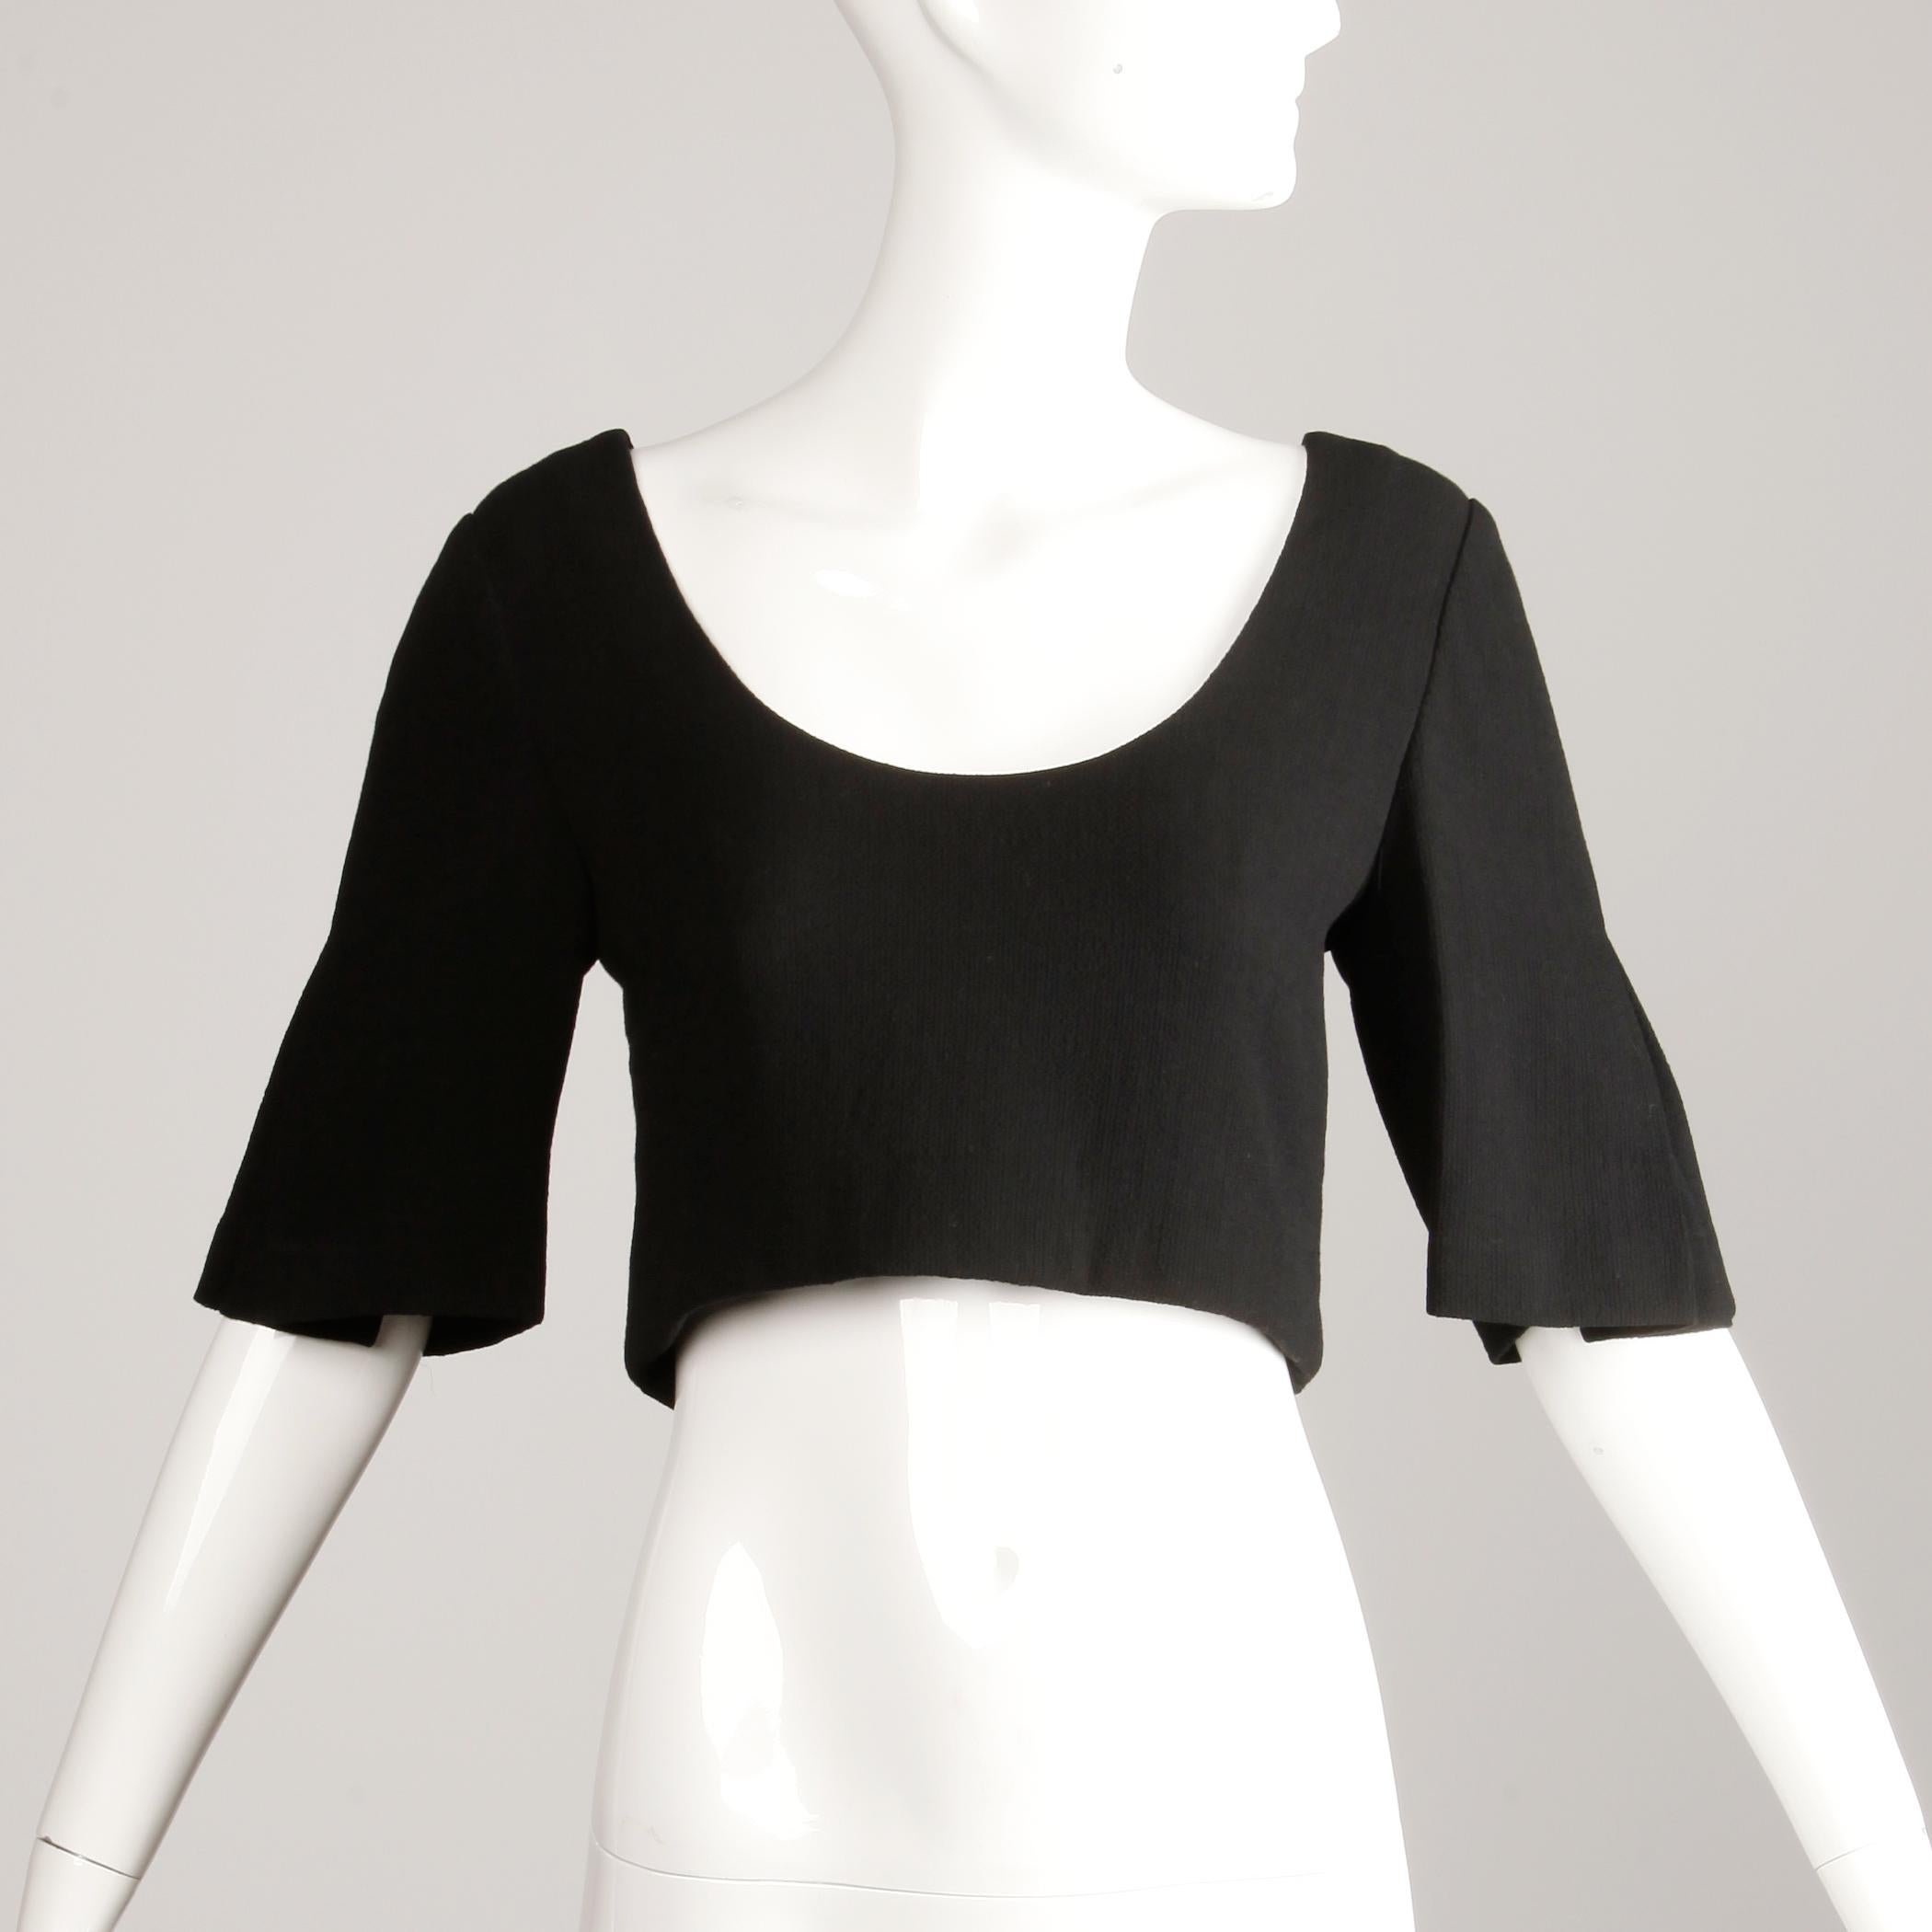 The perfect little black top! Vintage black wool crepe cropped top with 3/4 pleated bell sleeves by James Galanos. Unlined with rear button and snap closure. Fits like a modern size small. The bust measures 34